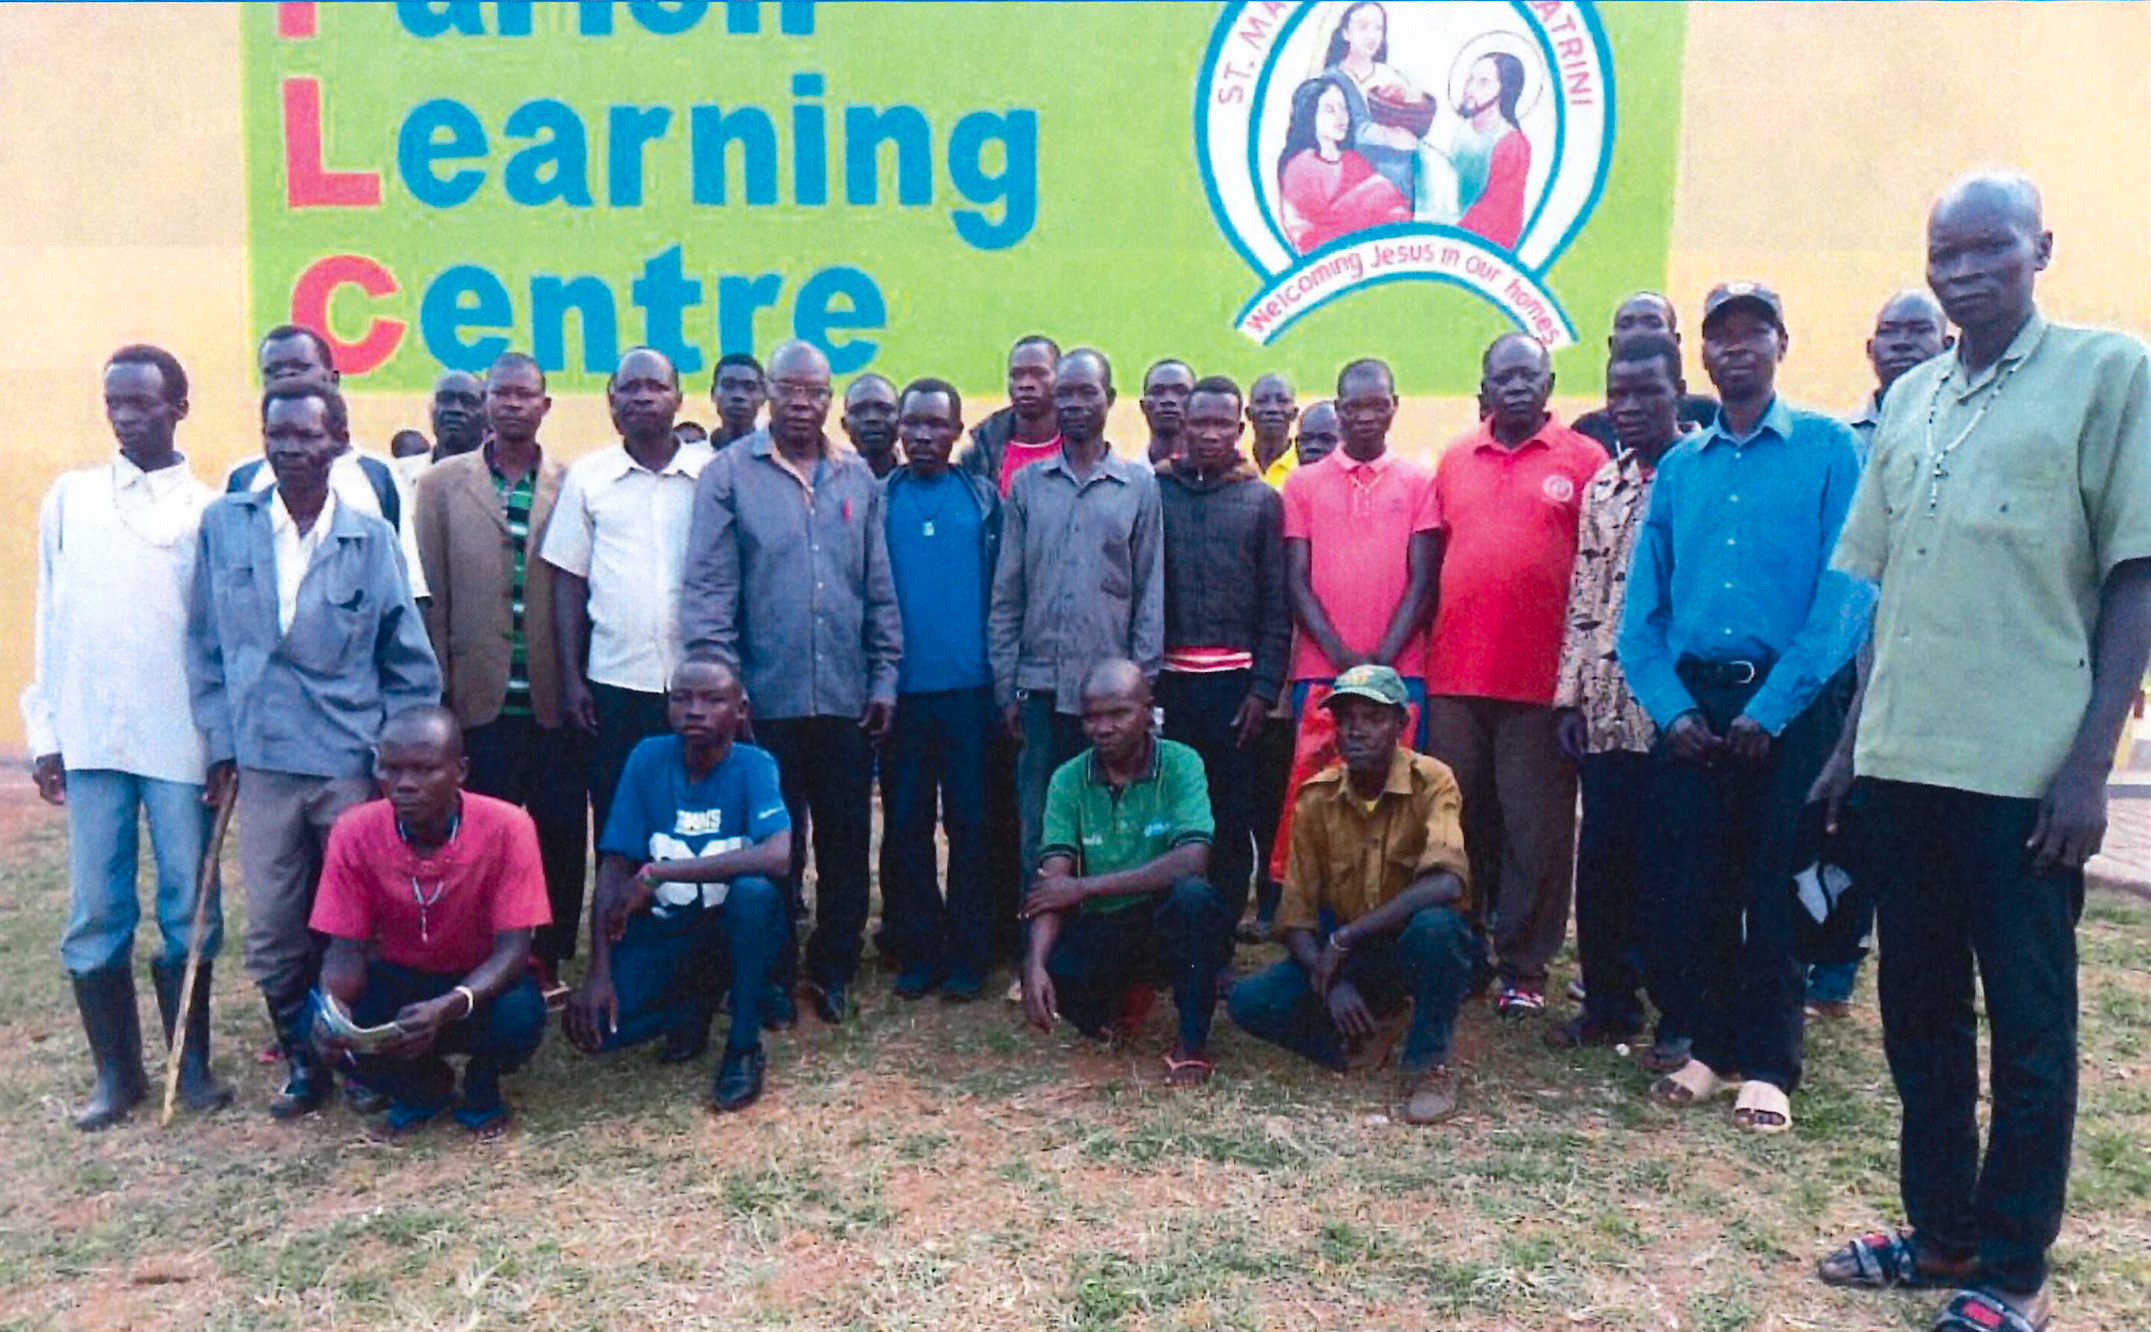 The Parish Learning Center in Arua, Uganda, keeps faith at the center of the peoples’ lives.